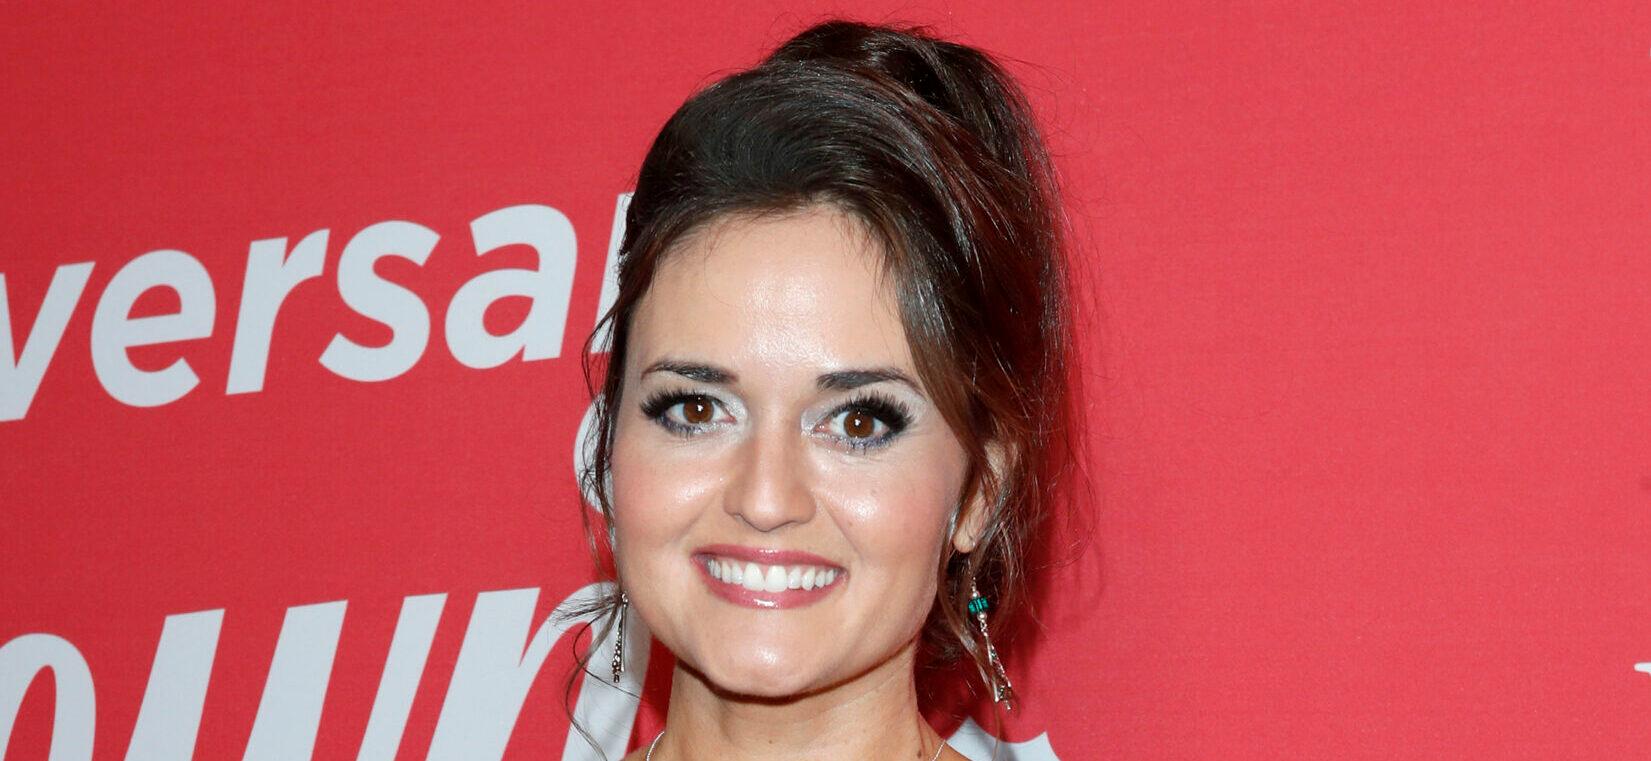 Danica McKellar Reveals The Secrets To Youth In 47th Birthday Celebration Snap!